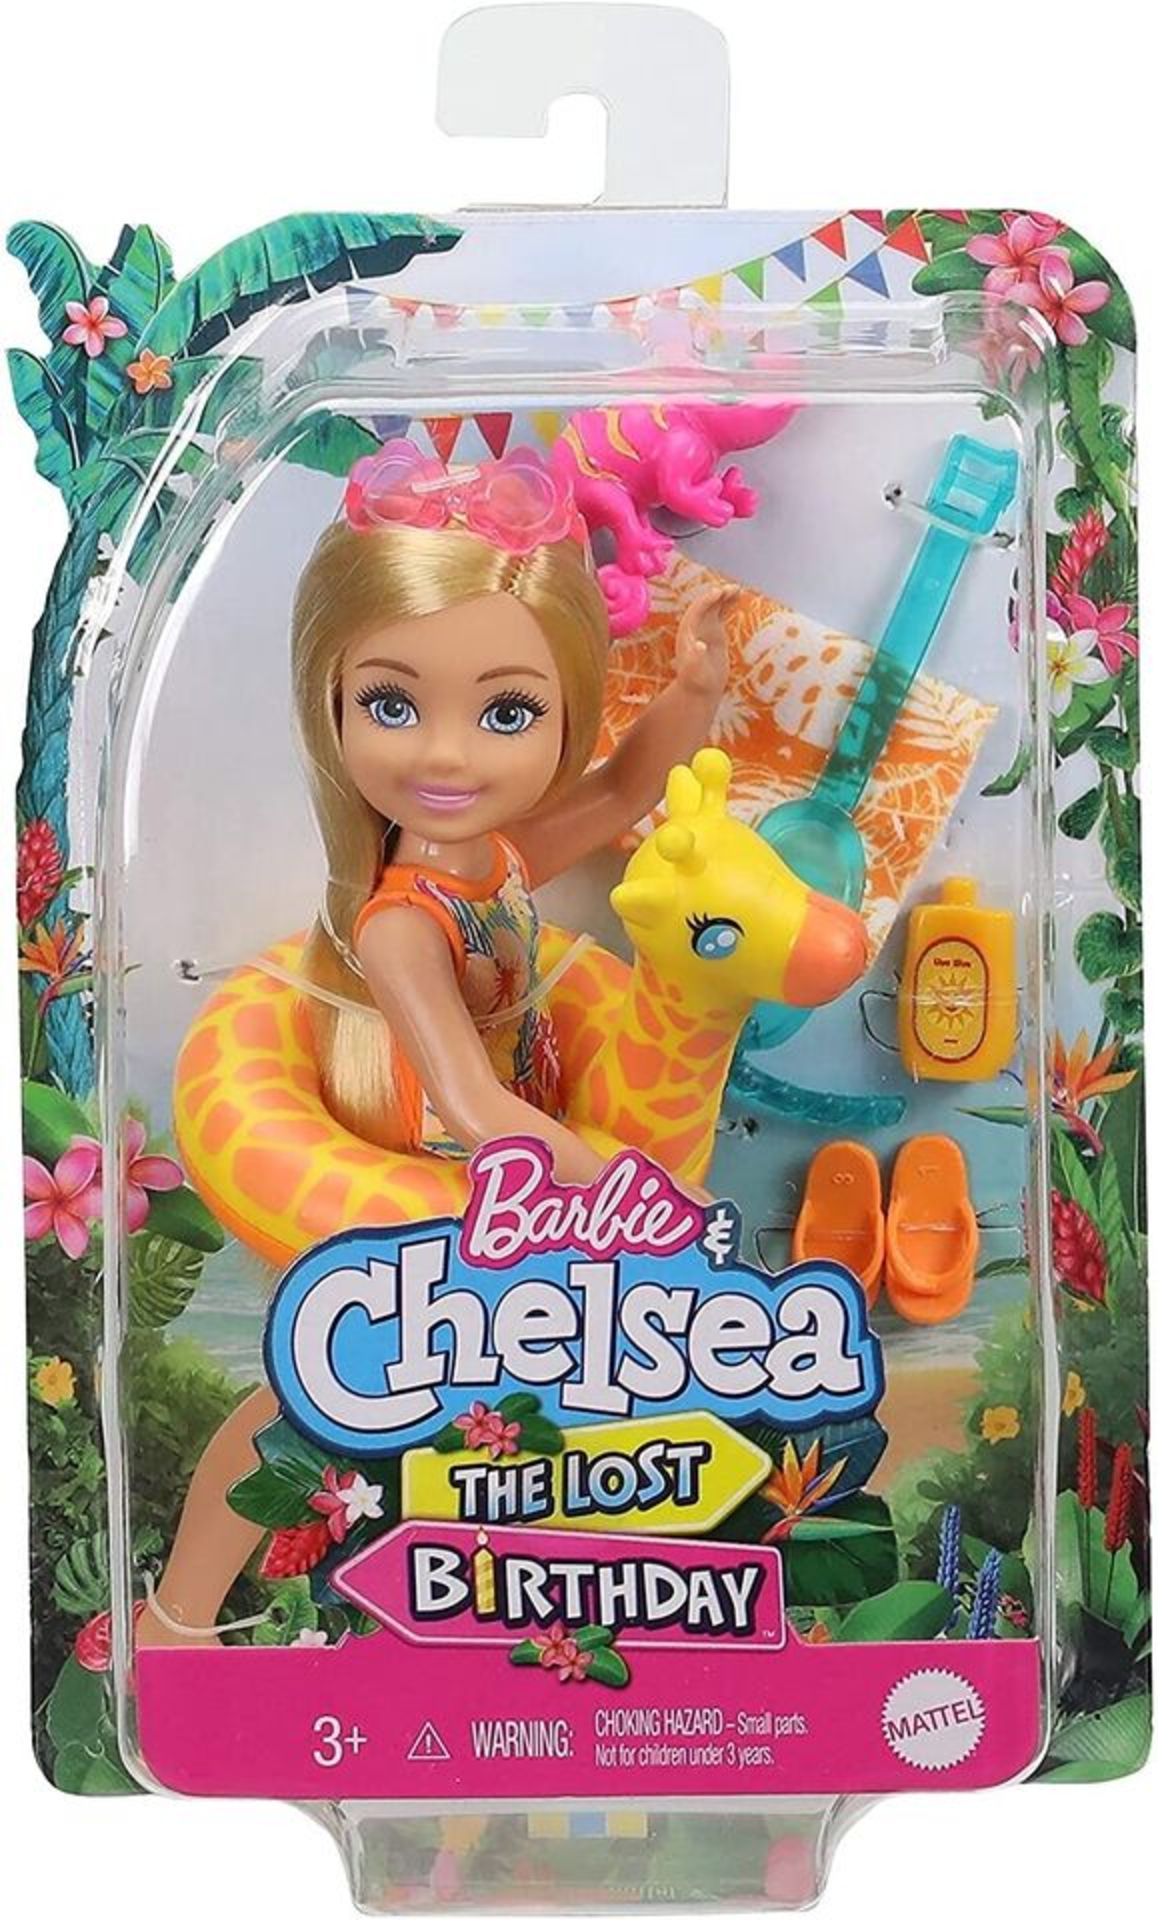 Barbie chelsea the lost birthday (Delivery Band A)